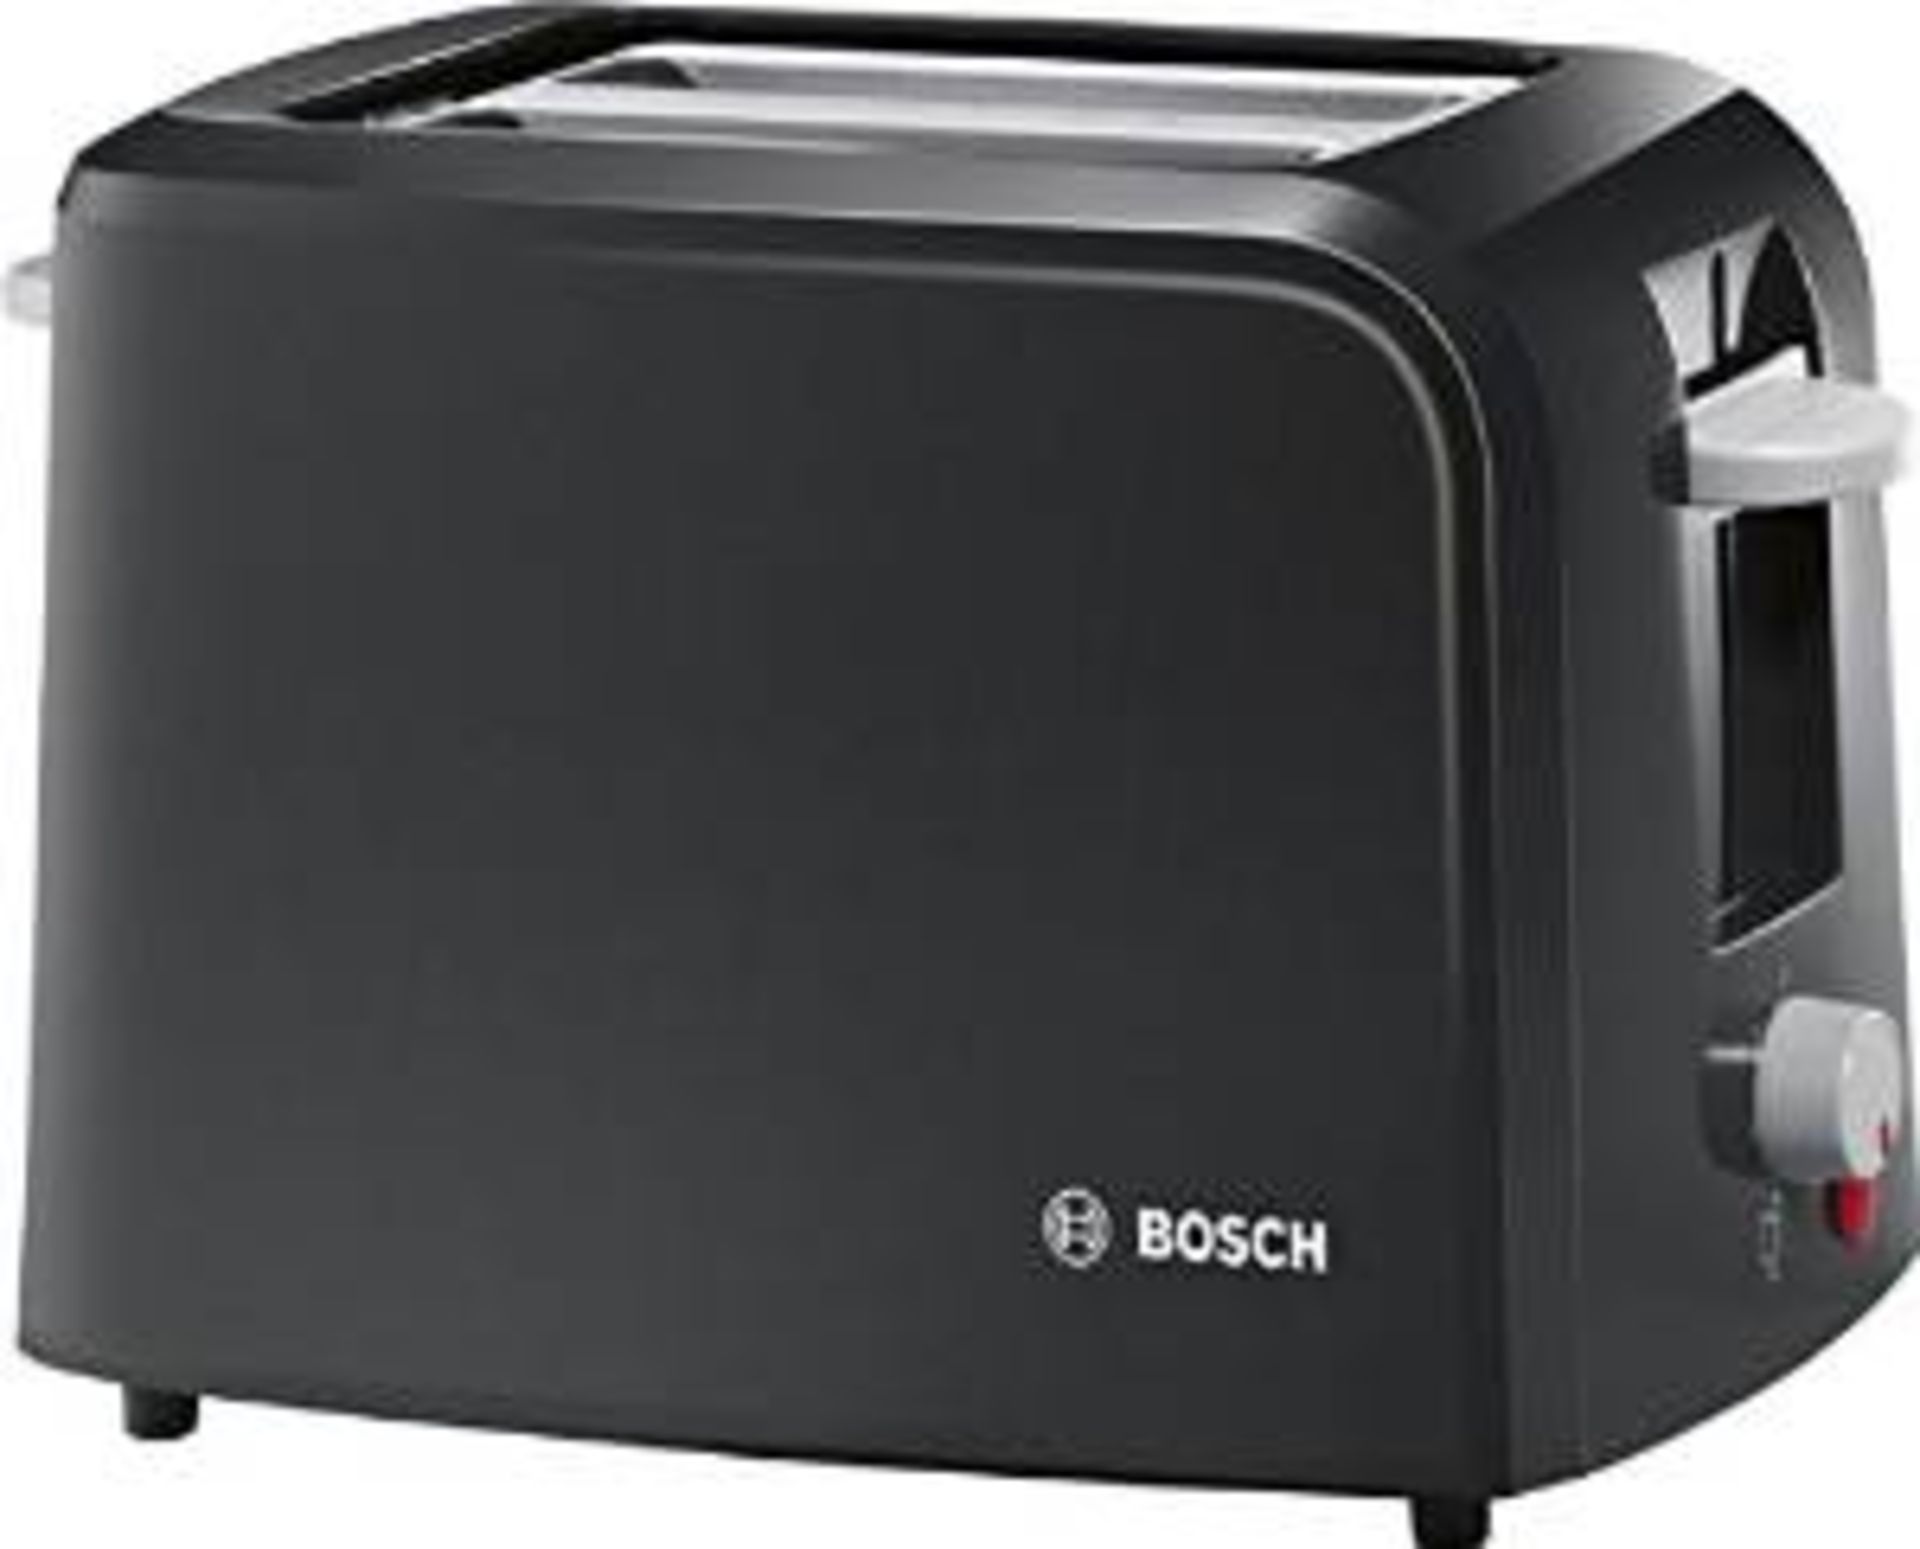 V Brand New Bosch Toaster with pop up bun warmer and crumb tray (Black) ISP £19.99 (Amazon) X 2 YOUR